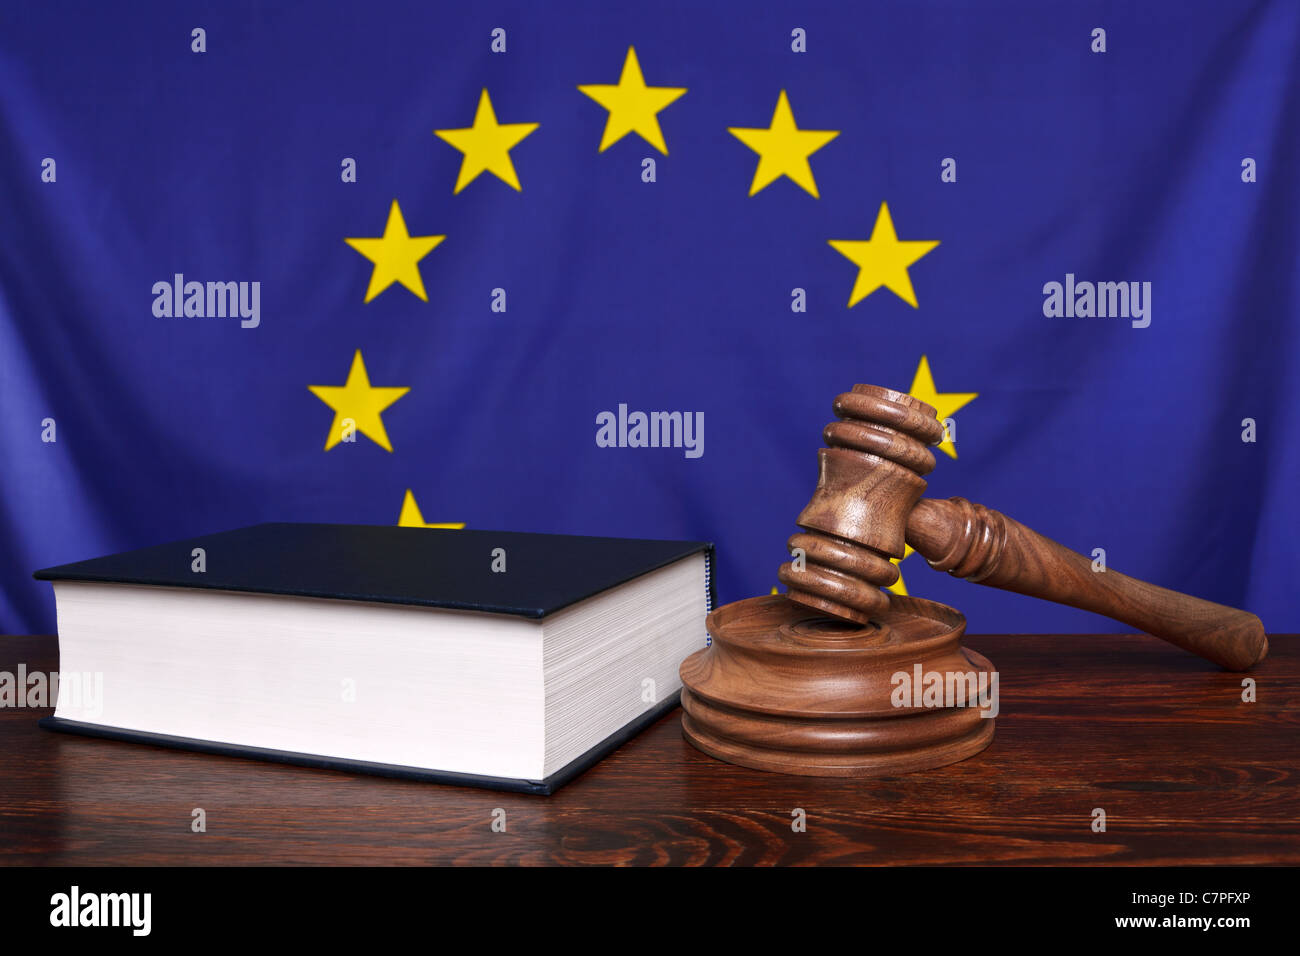 Still life photo of a gavel, block and law book on a judges bench with the European Union flag behind. Stock Photo